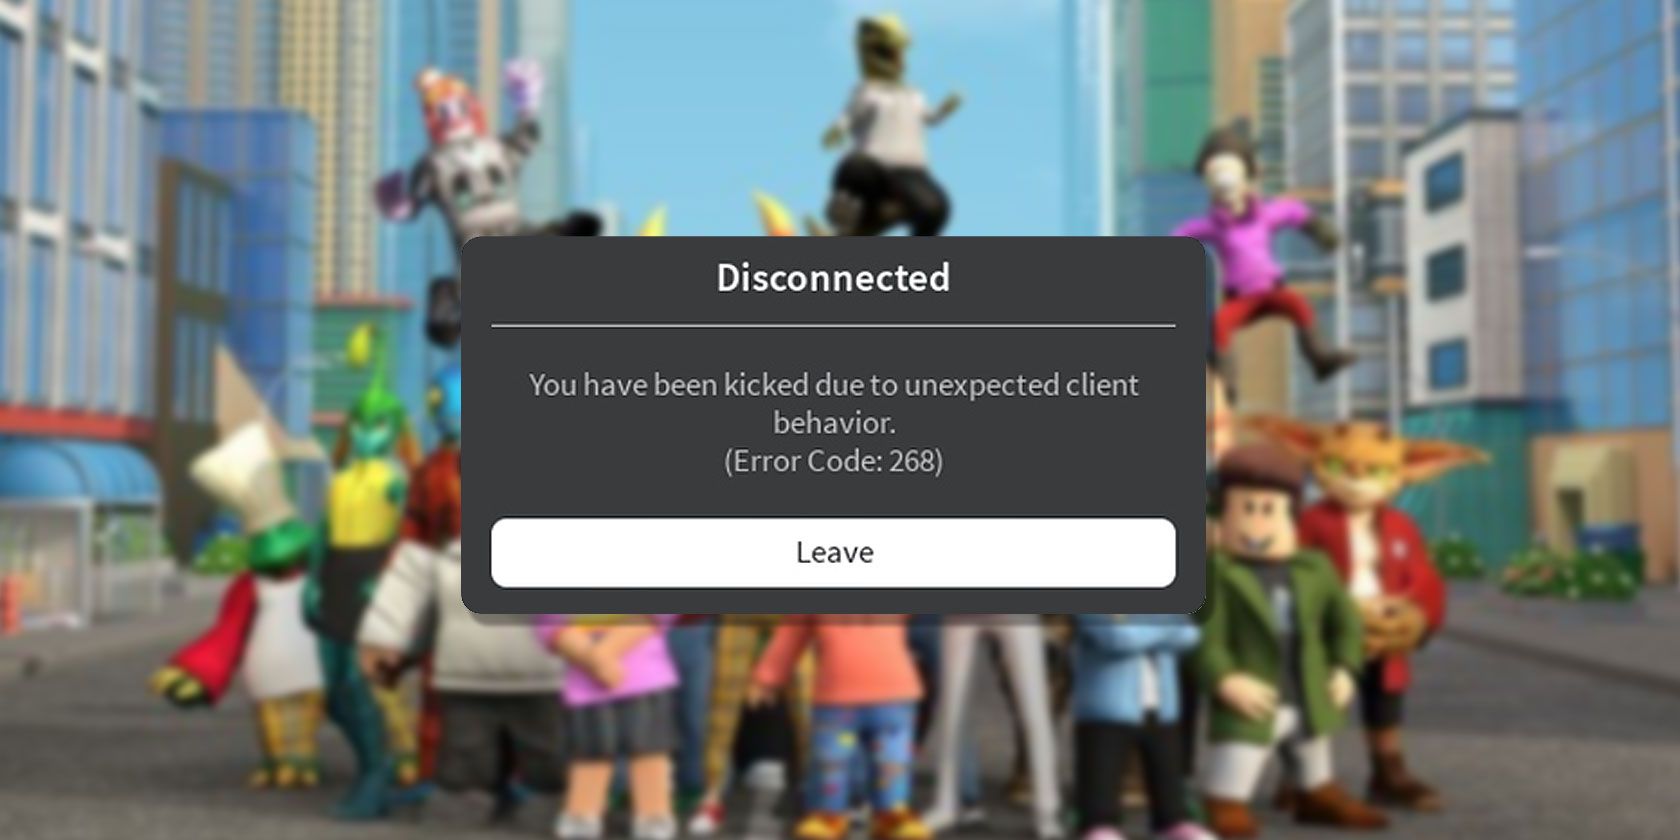 Roblox error code 268: What is it and how to fix it - Android